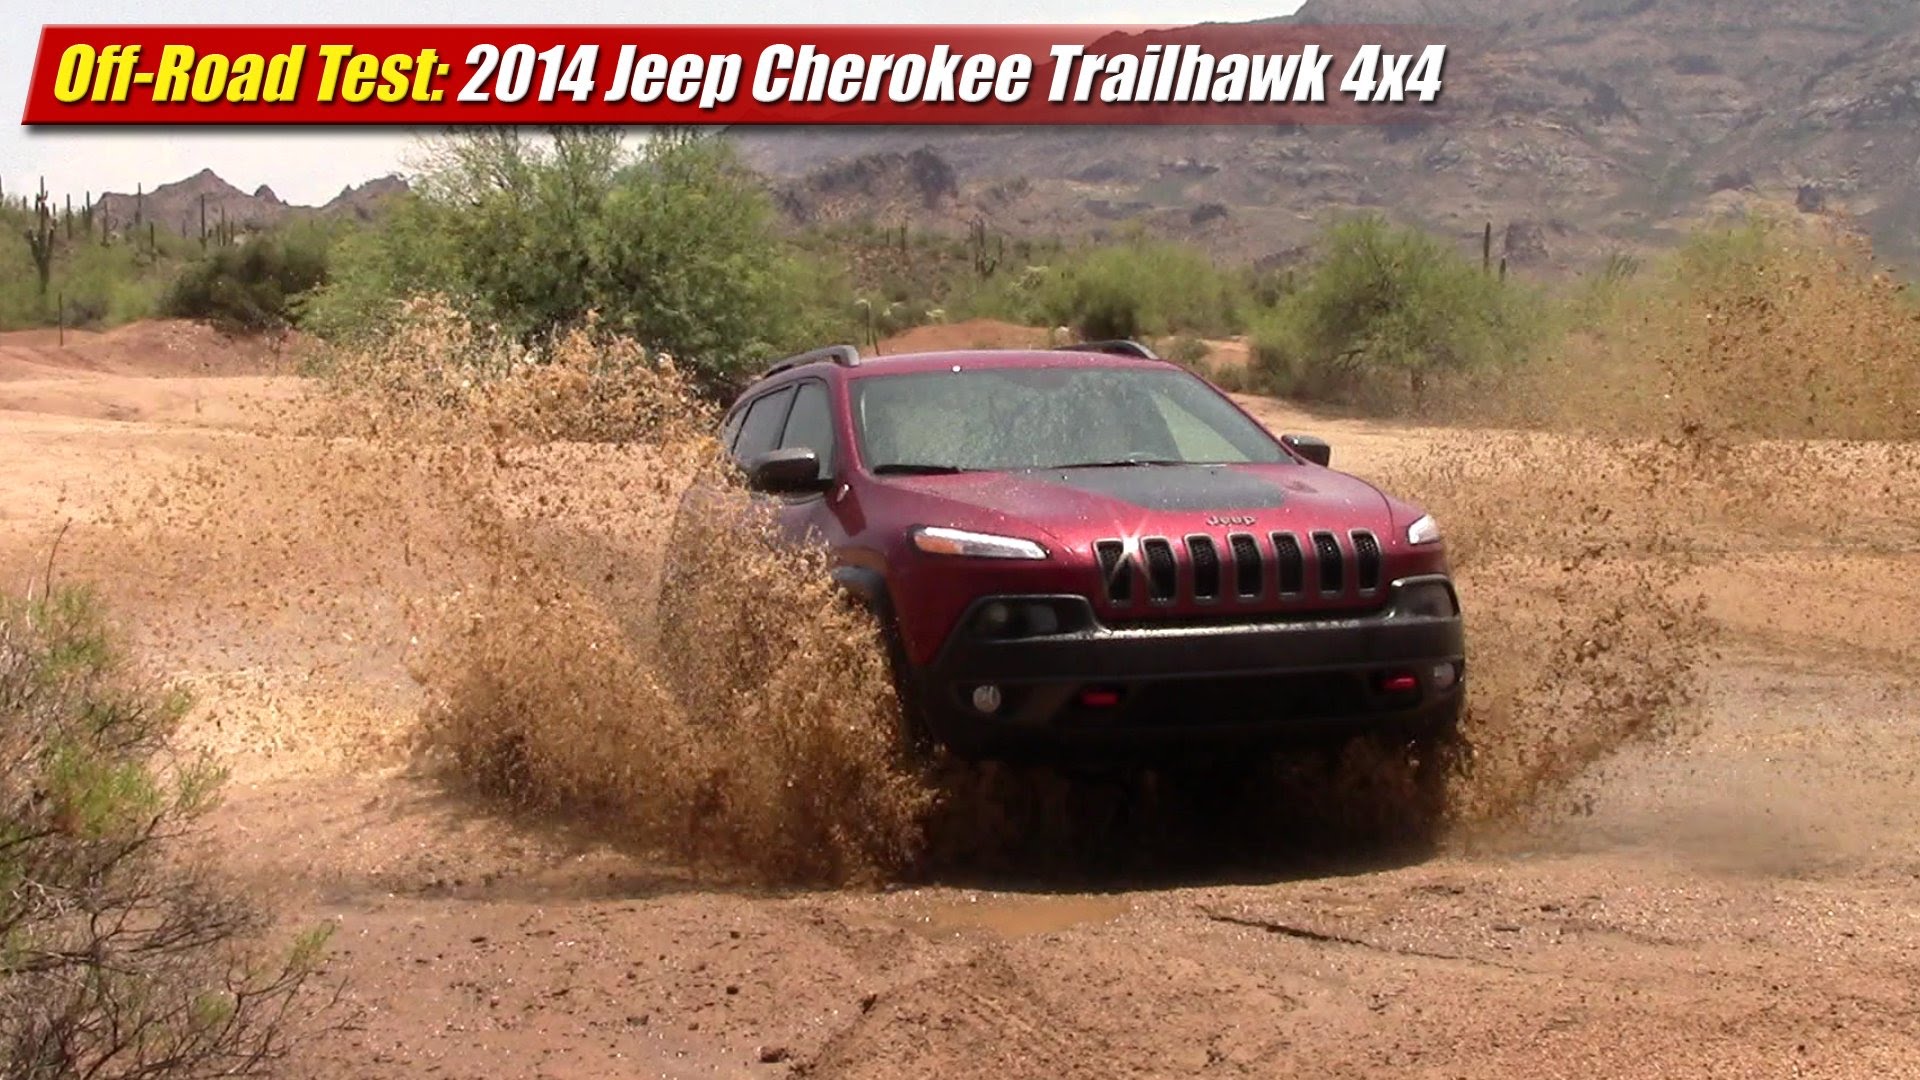 Jeep wider front track #4